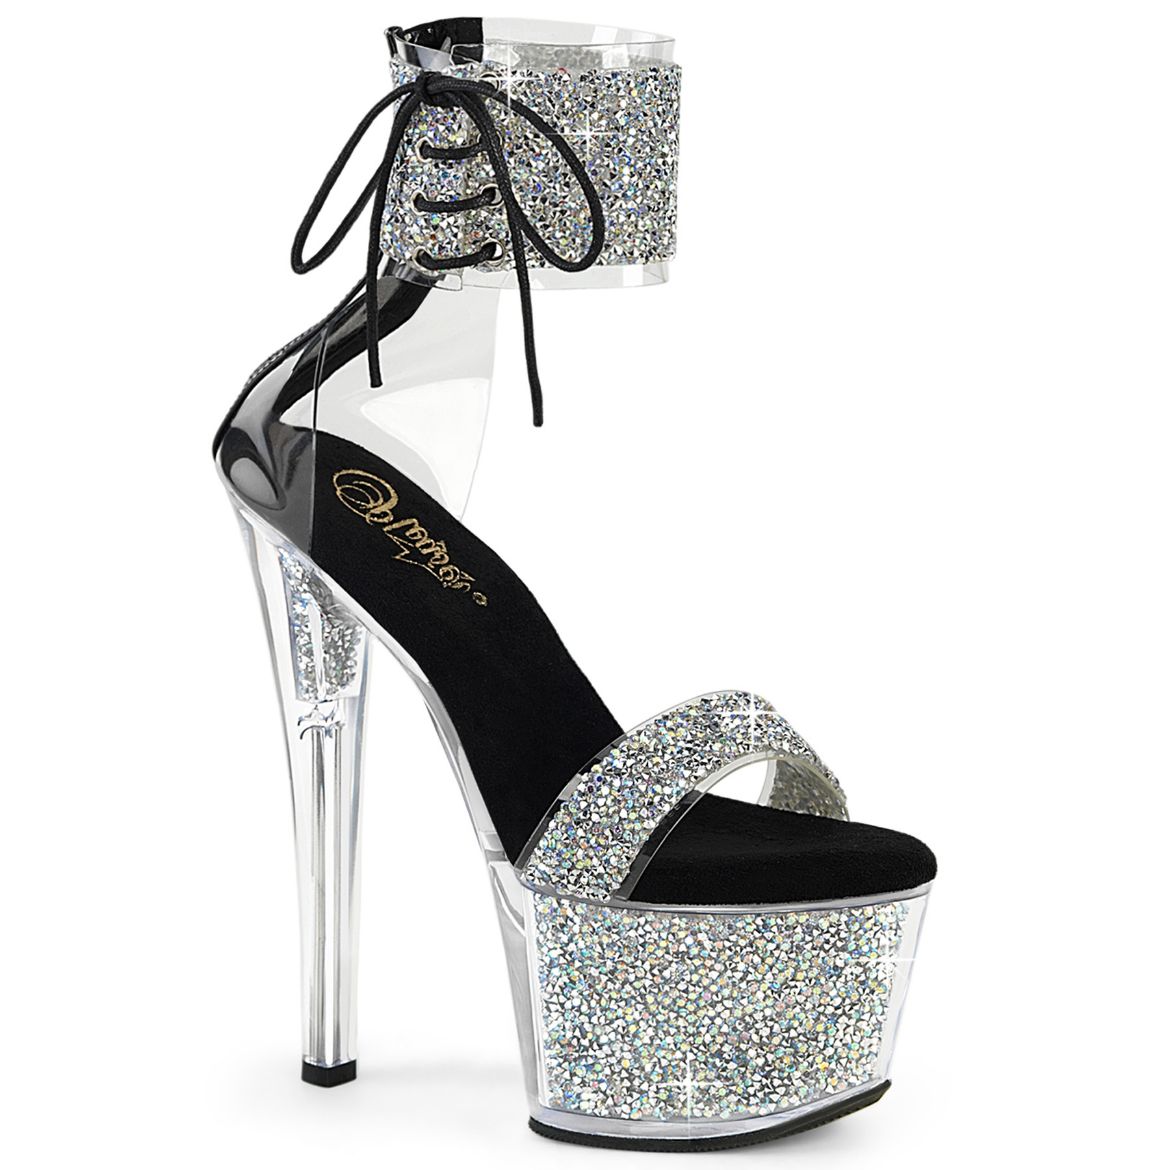 Product image of Pleaser SKY-327RSI Slv Multi RS-Blk/Slv RS 7 Inch Heel 2 3/4 Inch PF Ankle Cuff Sandal w/RS Back Zip